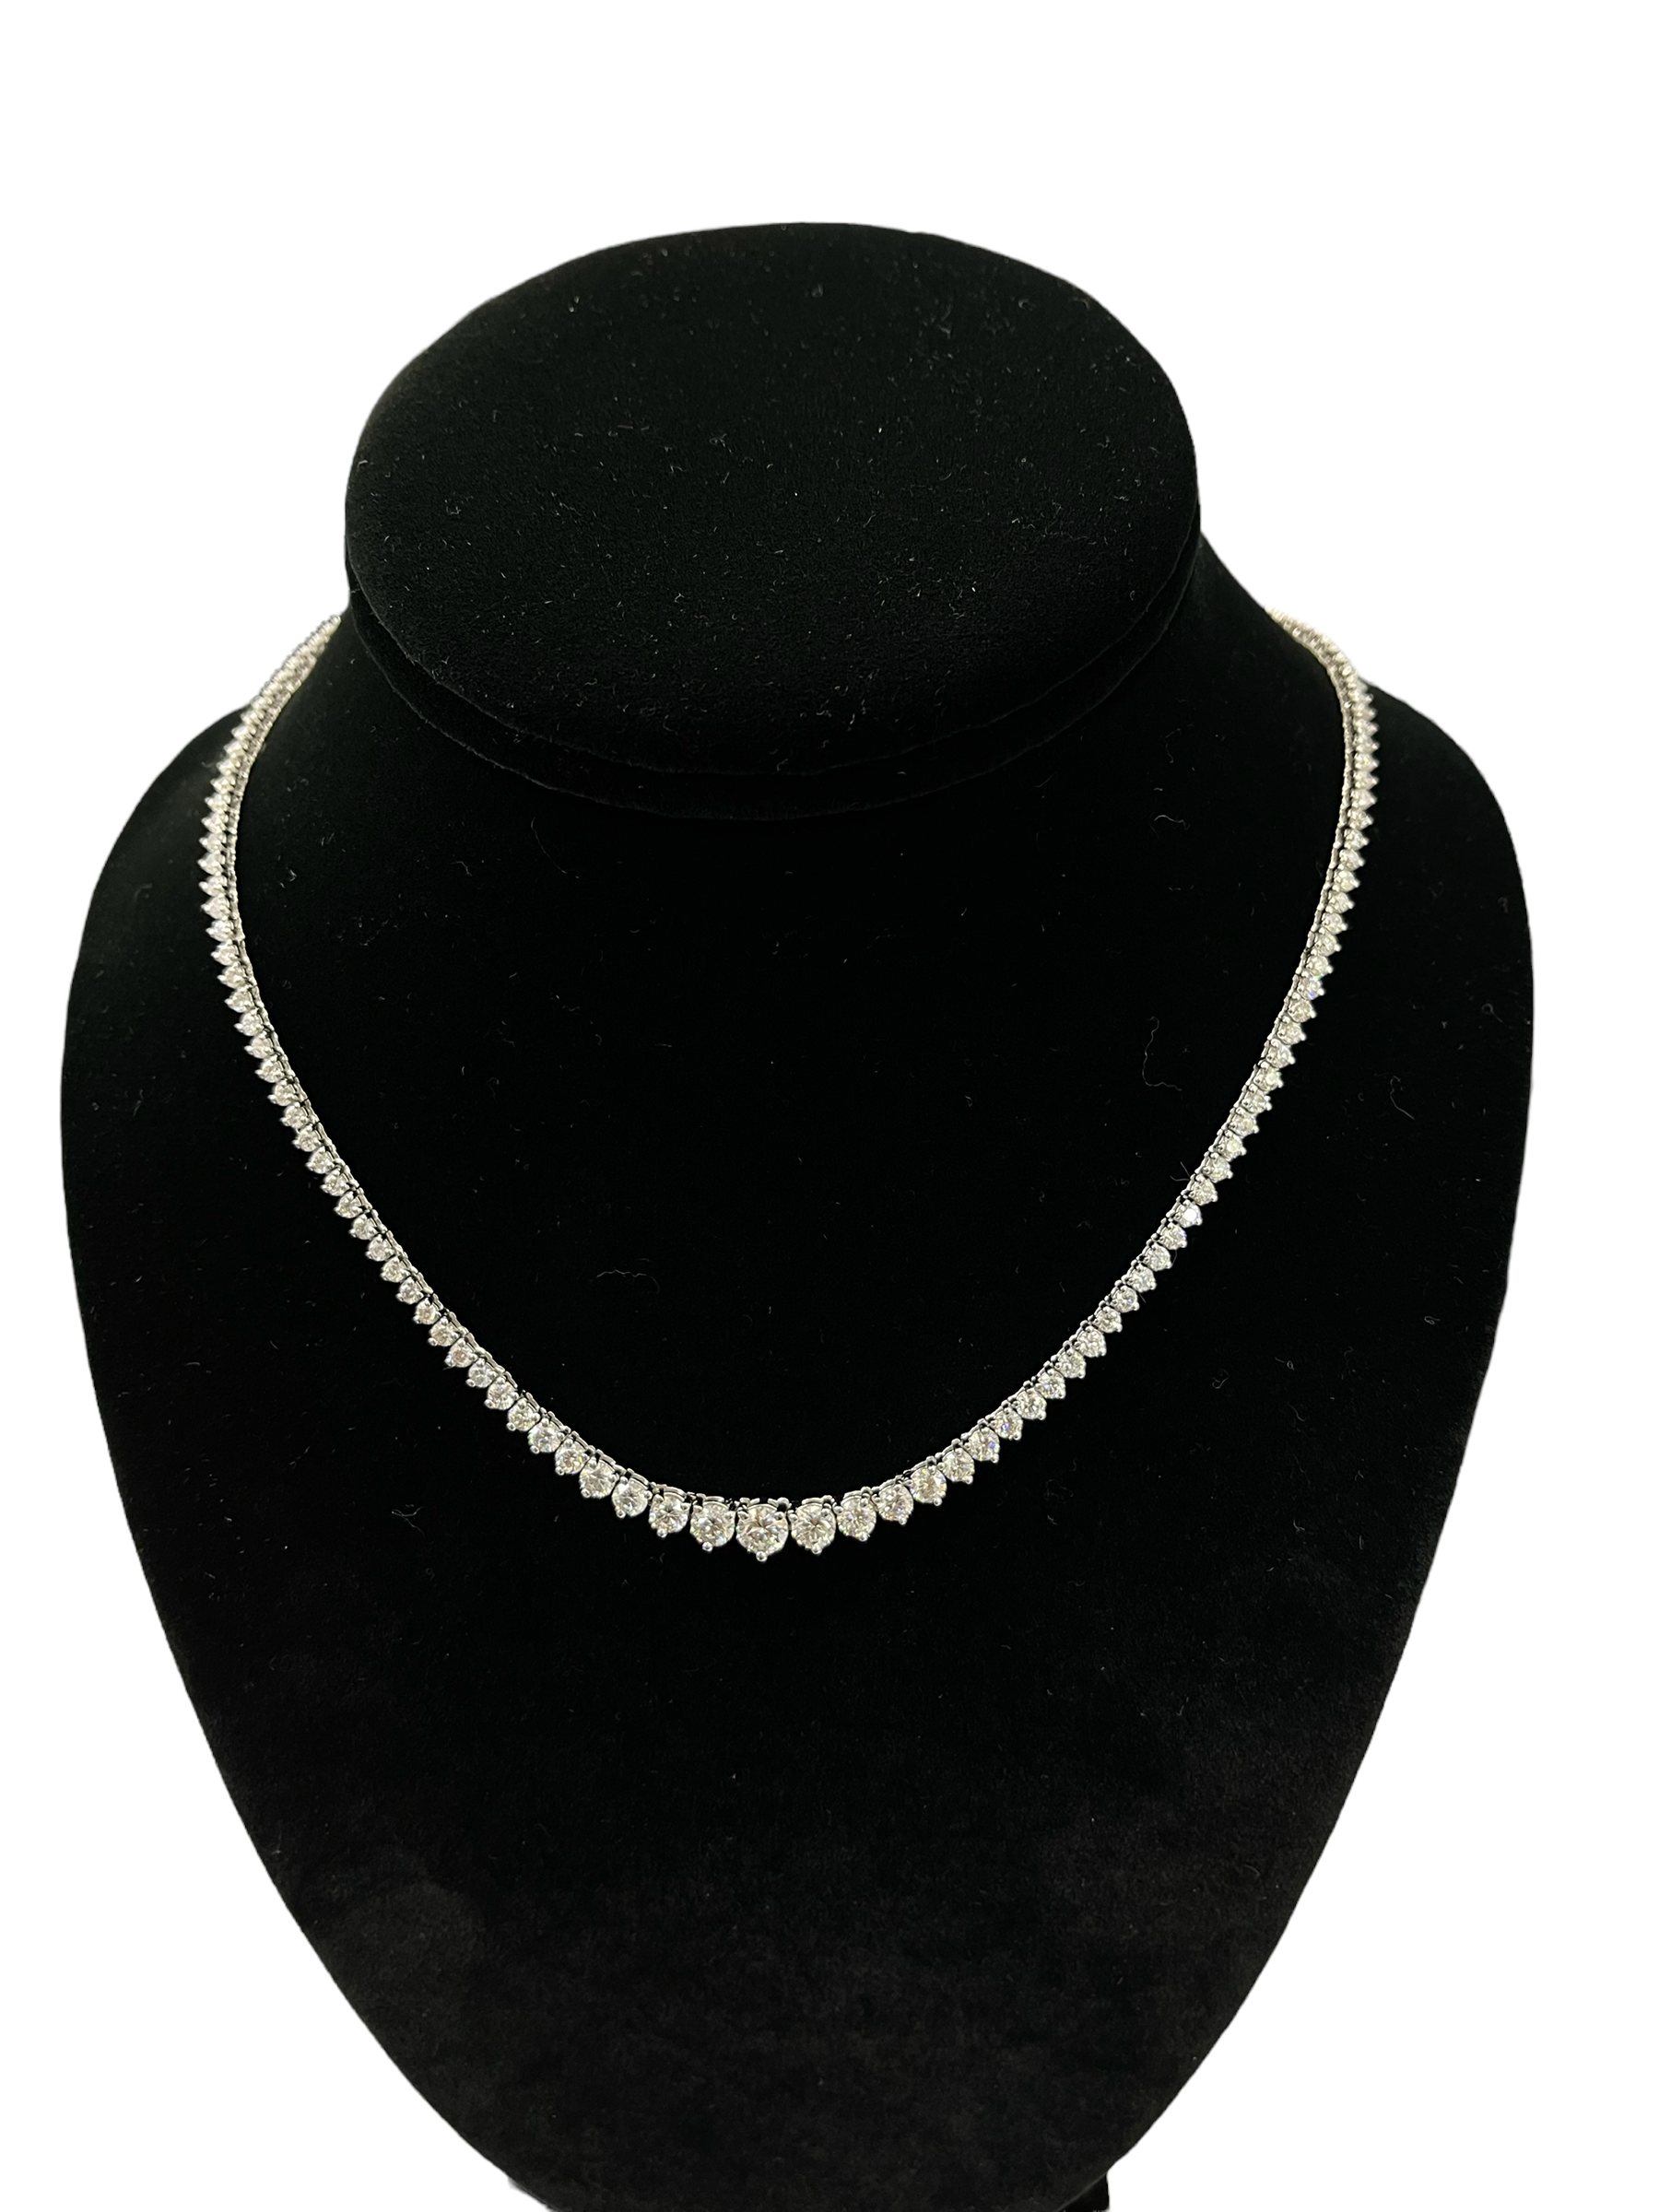 Graduated Tennis Diamond Necklace Chain 14kt White Gold